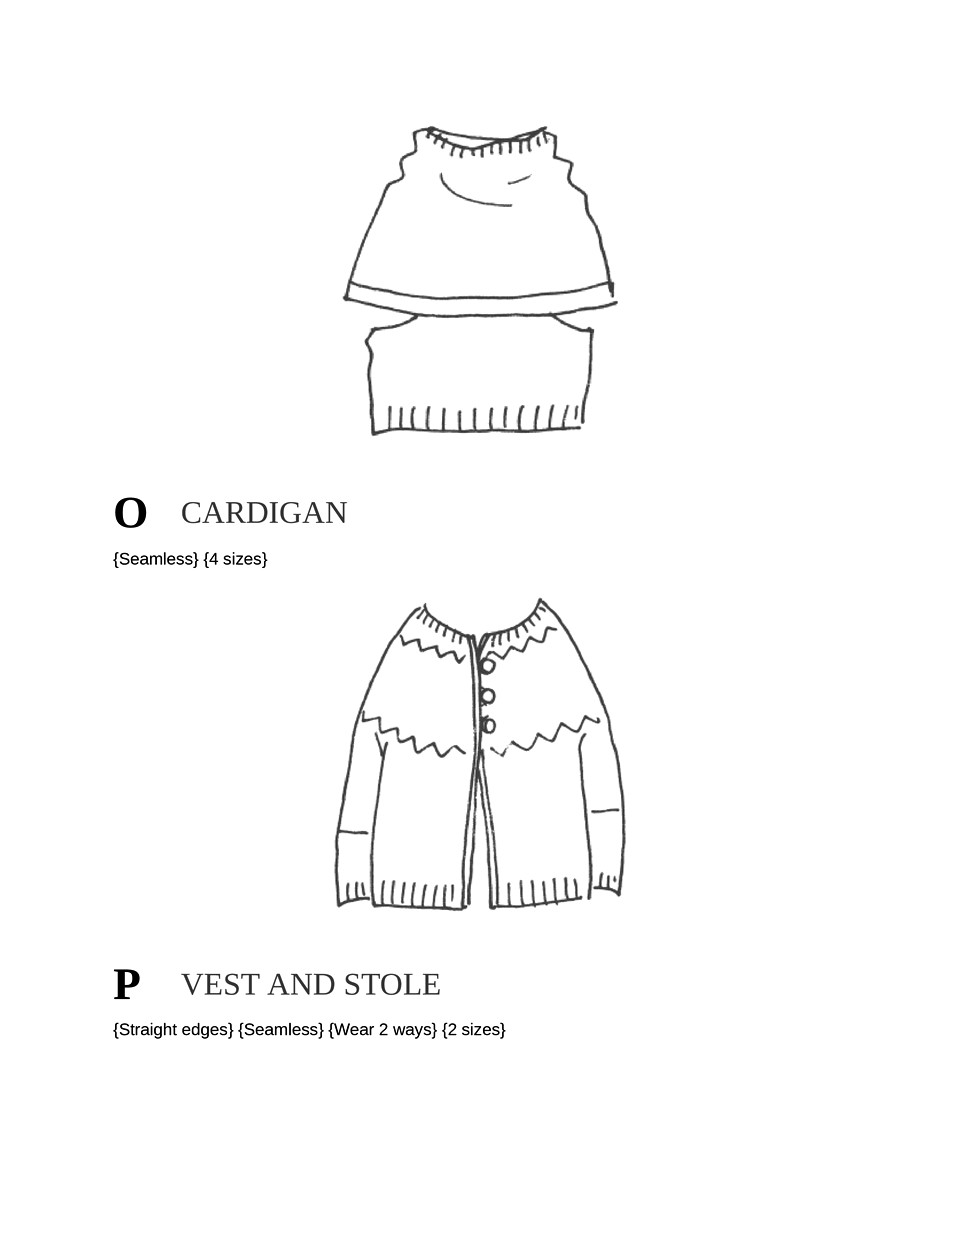 Japanese Knitting Patterns for Sweaters Scarves and More-10